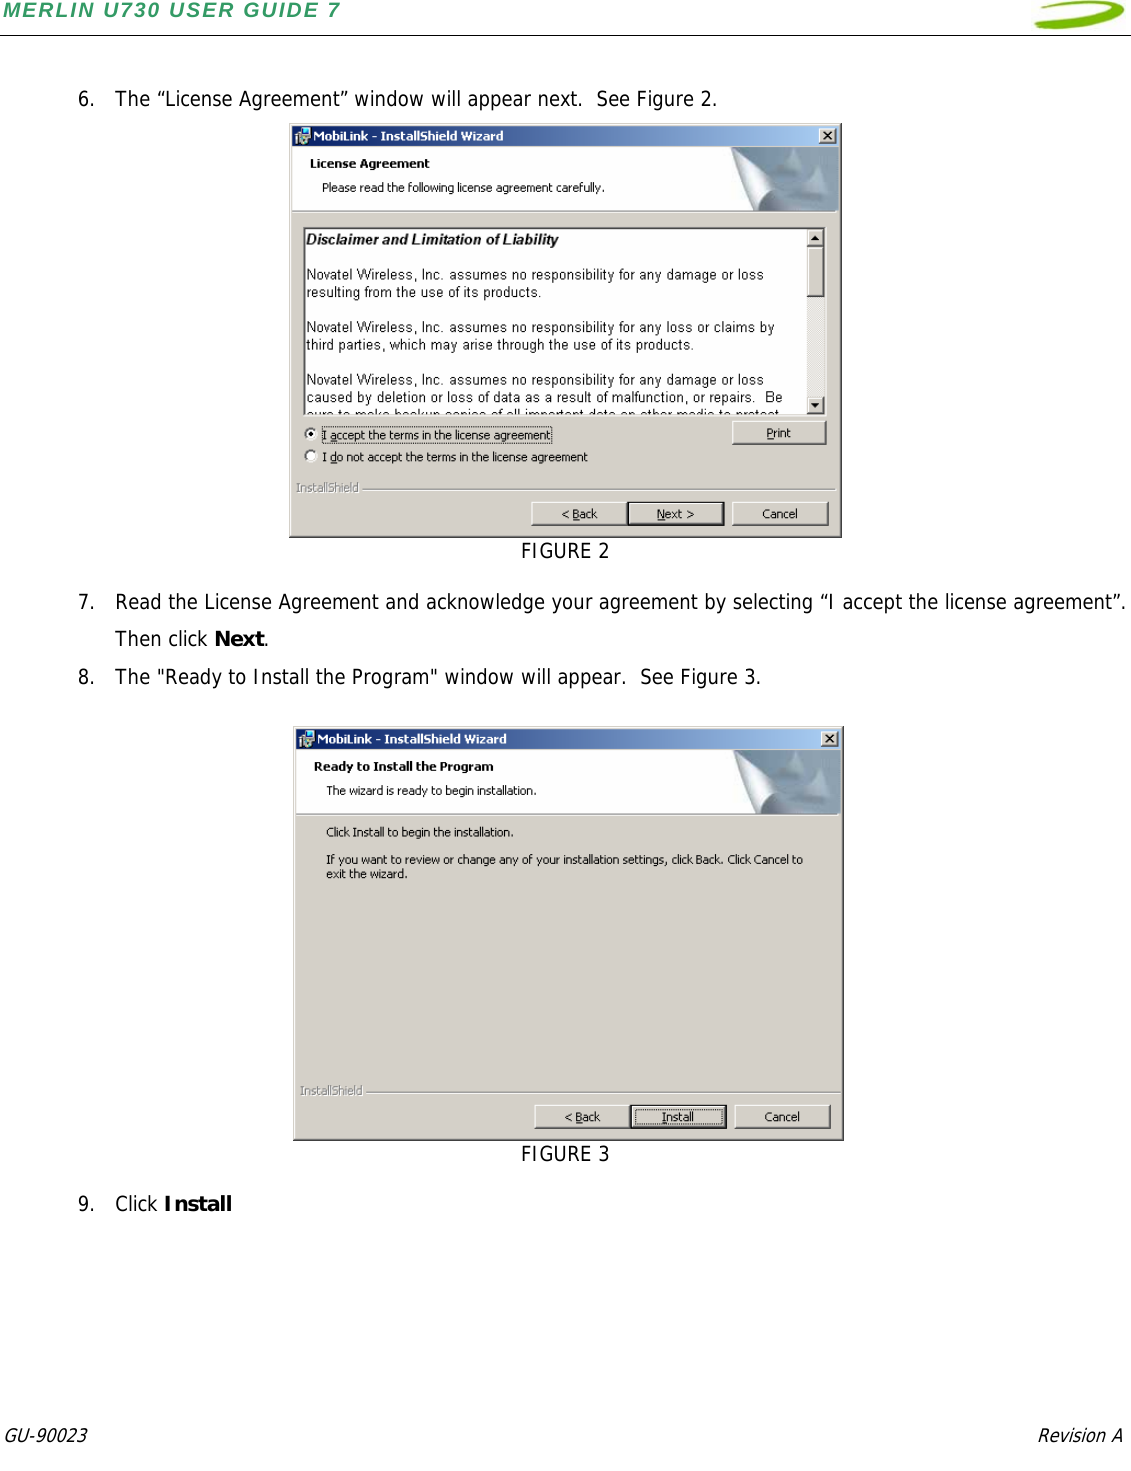 MERLIN U730 USER GUIDE 7  GU-90023            Revision A    6. The “License Agreement” window will appear next.  See Figure 2.  FIGURE 2  7. Read the License Agreement and acknowledge your agreement by selecting “I accept the license agreement”.  Then click Next. 8. The &quot;Ready to Install the Program&quot; window will appear.  See Figure 3.     FIGURE 3  9. Click Install 